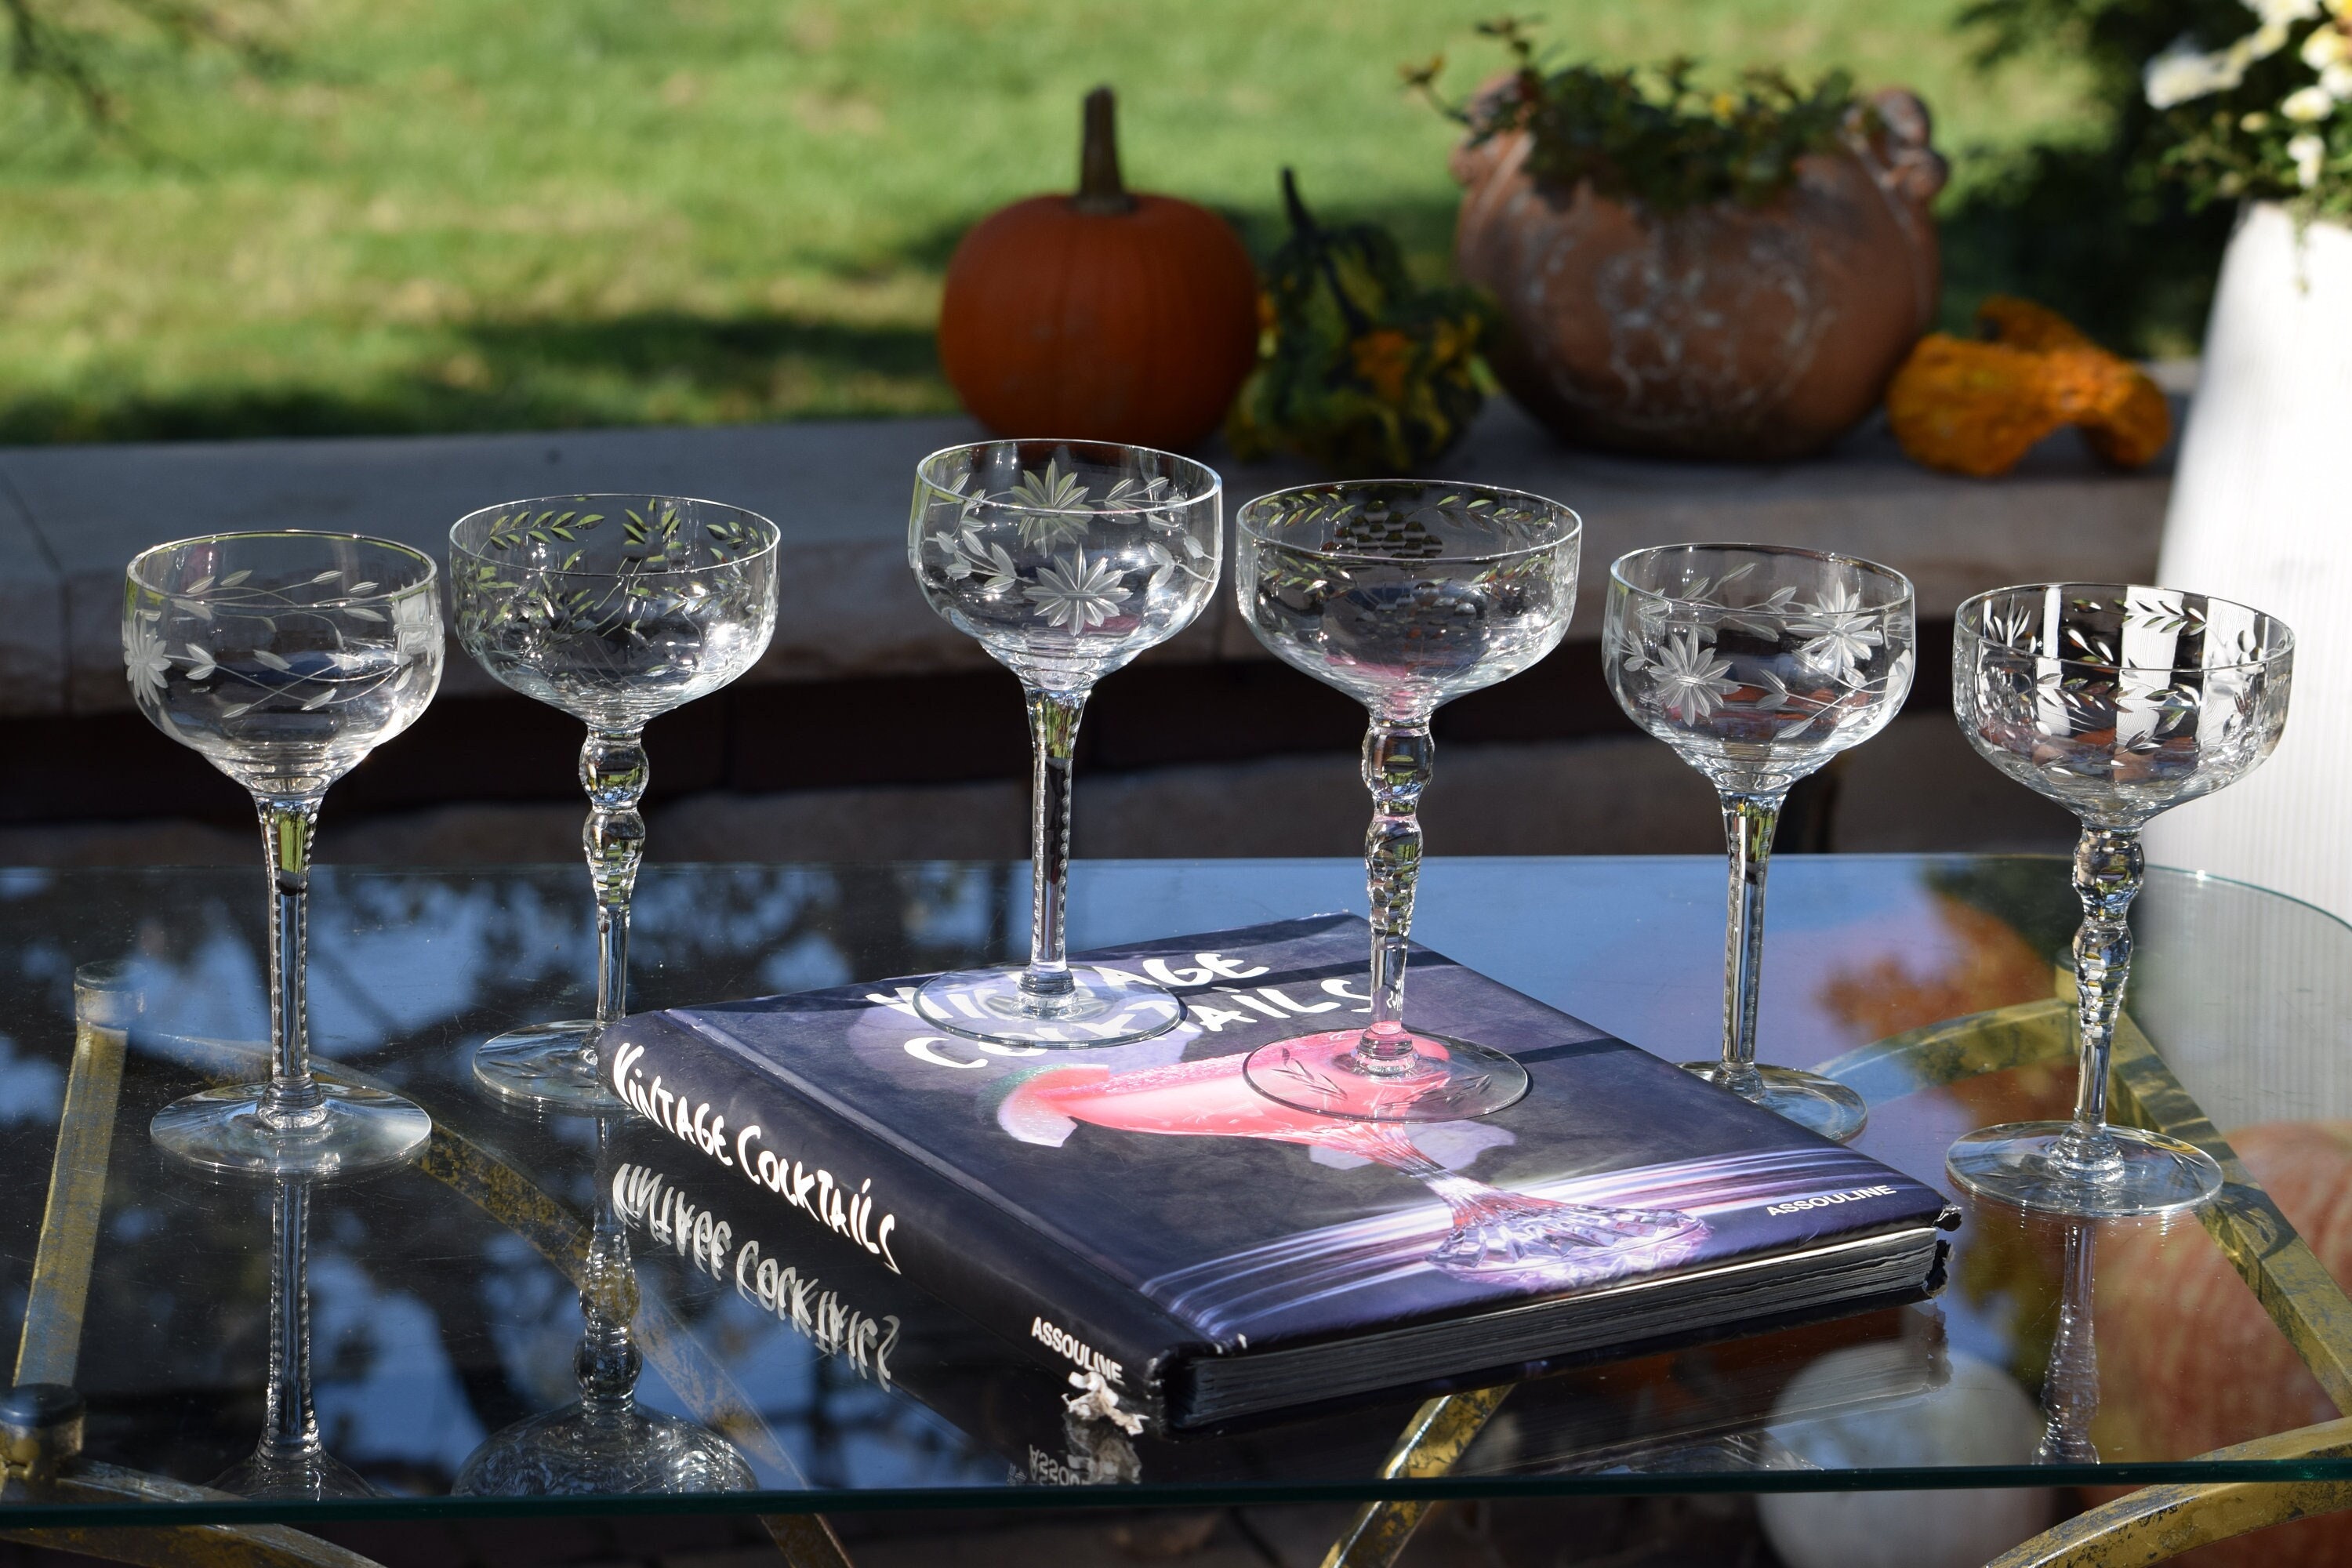 4 Vintage Etched CRYSTAL Cocktail Martini Glasses, Set of 4 Mis-Matched -  Mixed Cocktail glasses, Nick and Nora, Vintage Champagne Glasses